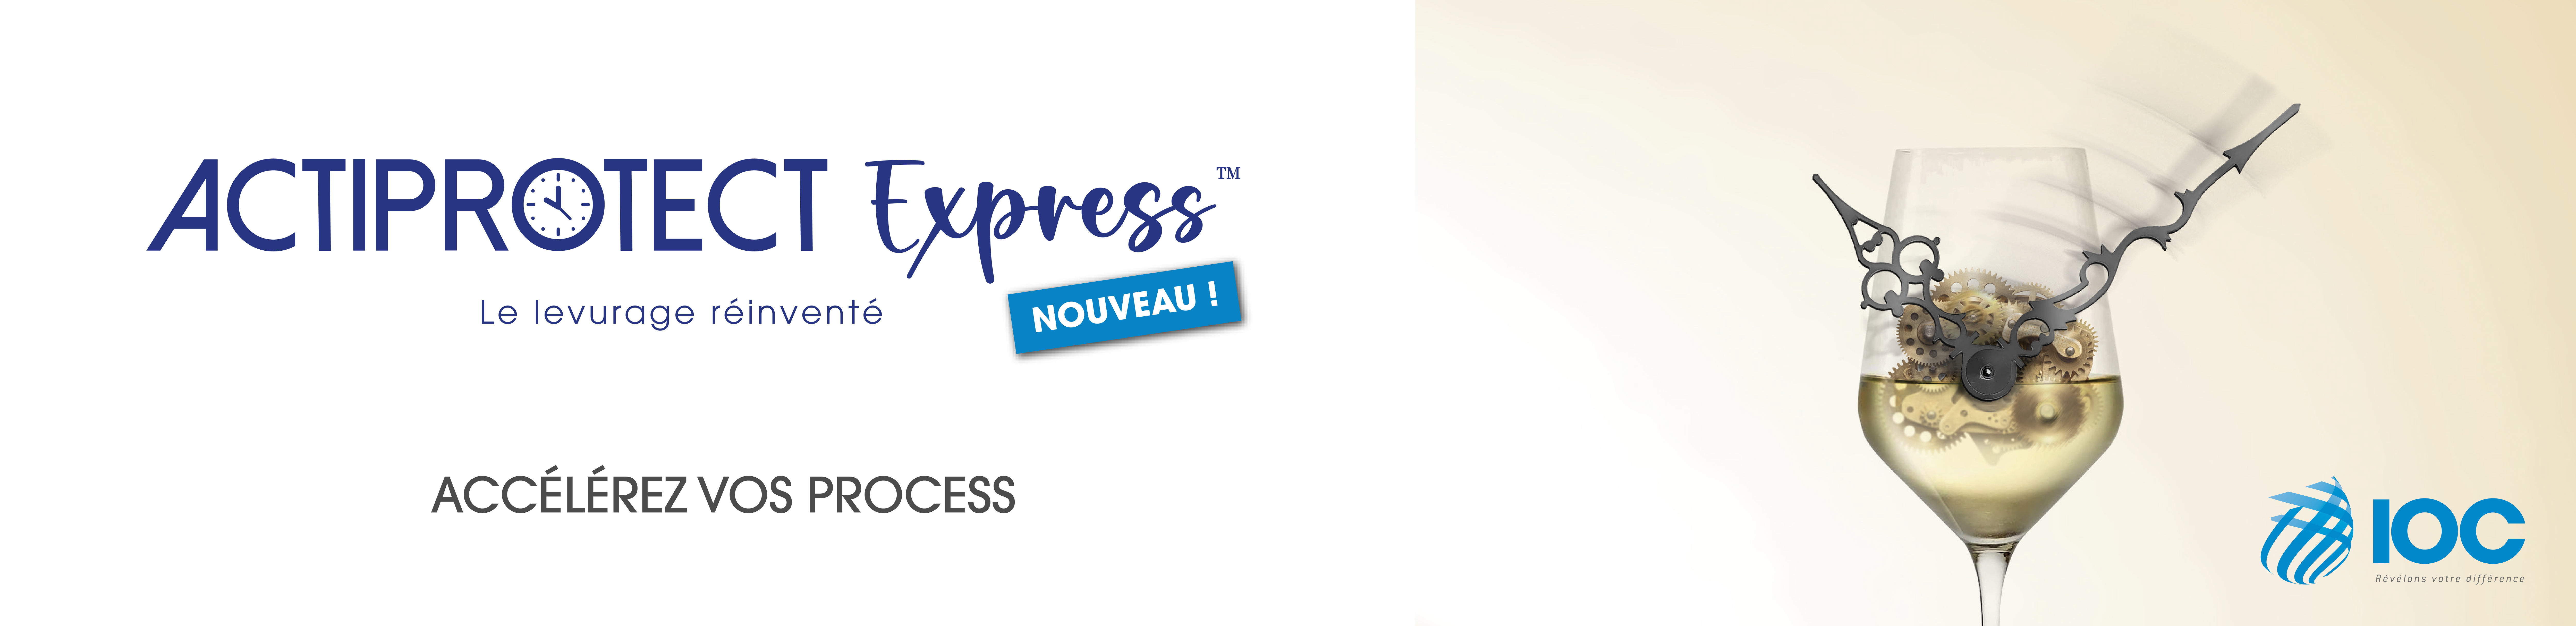 BANNIERE ACTIPROTECT EXPRESS